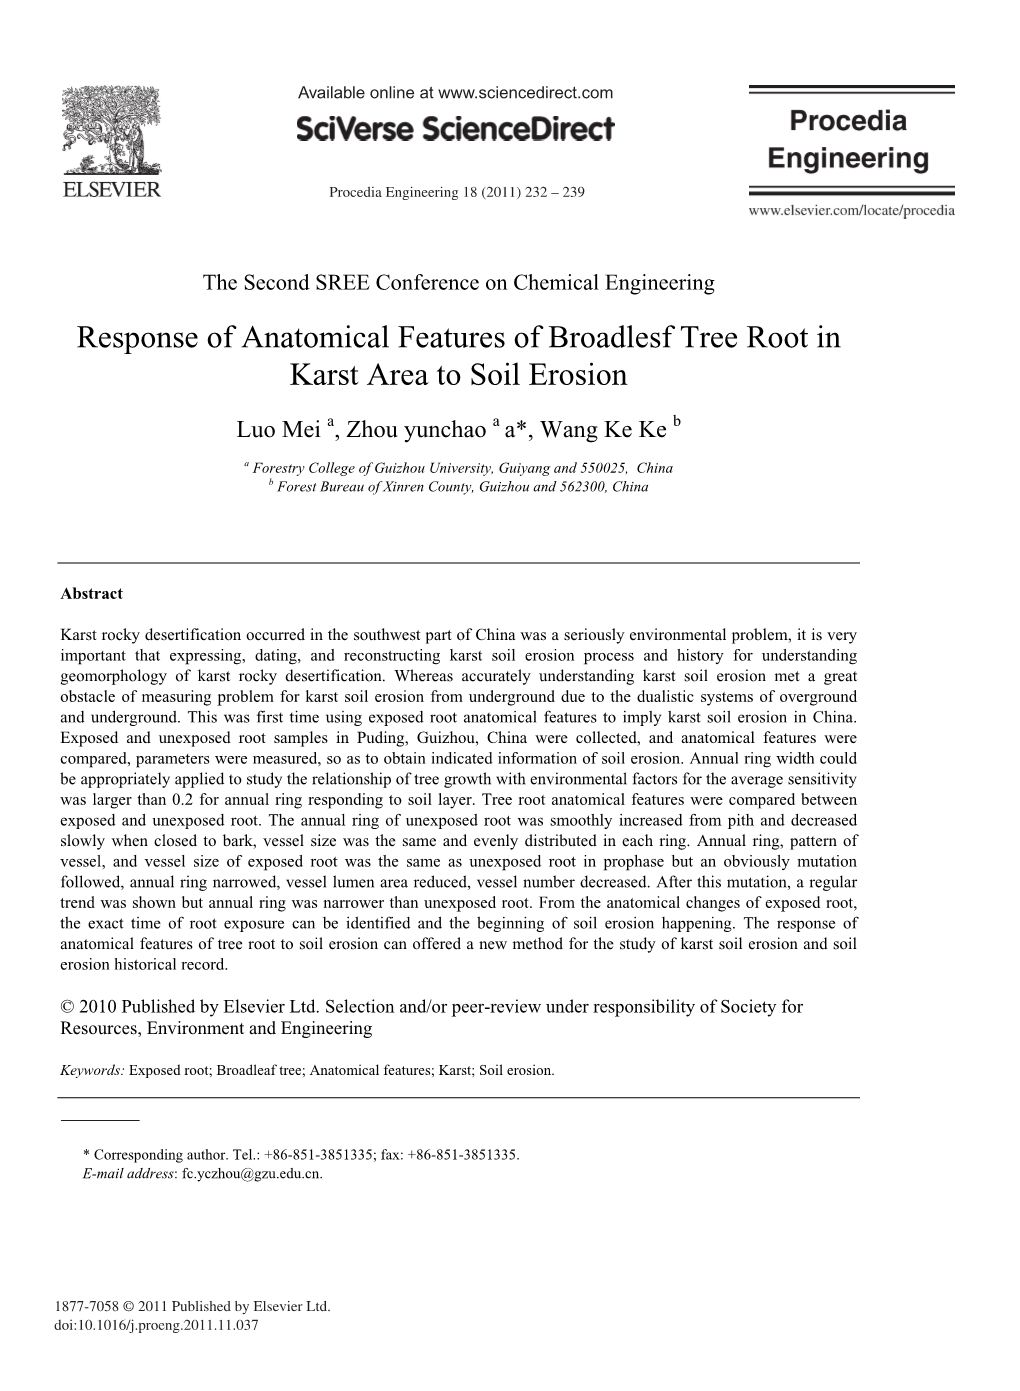 Response of Anatomical Features of Broadlesf Tree Root in Karst Area to Soil Erosion